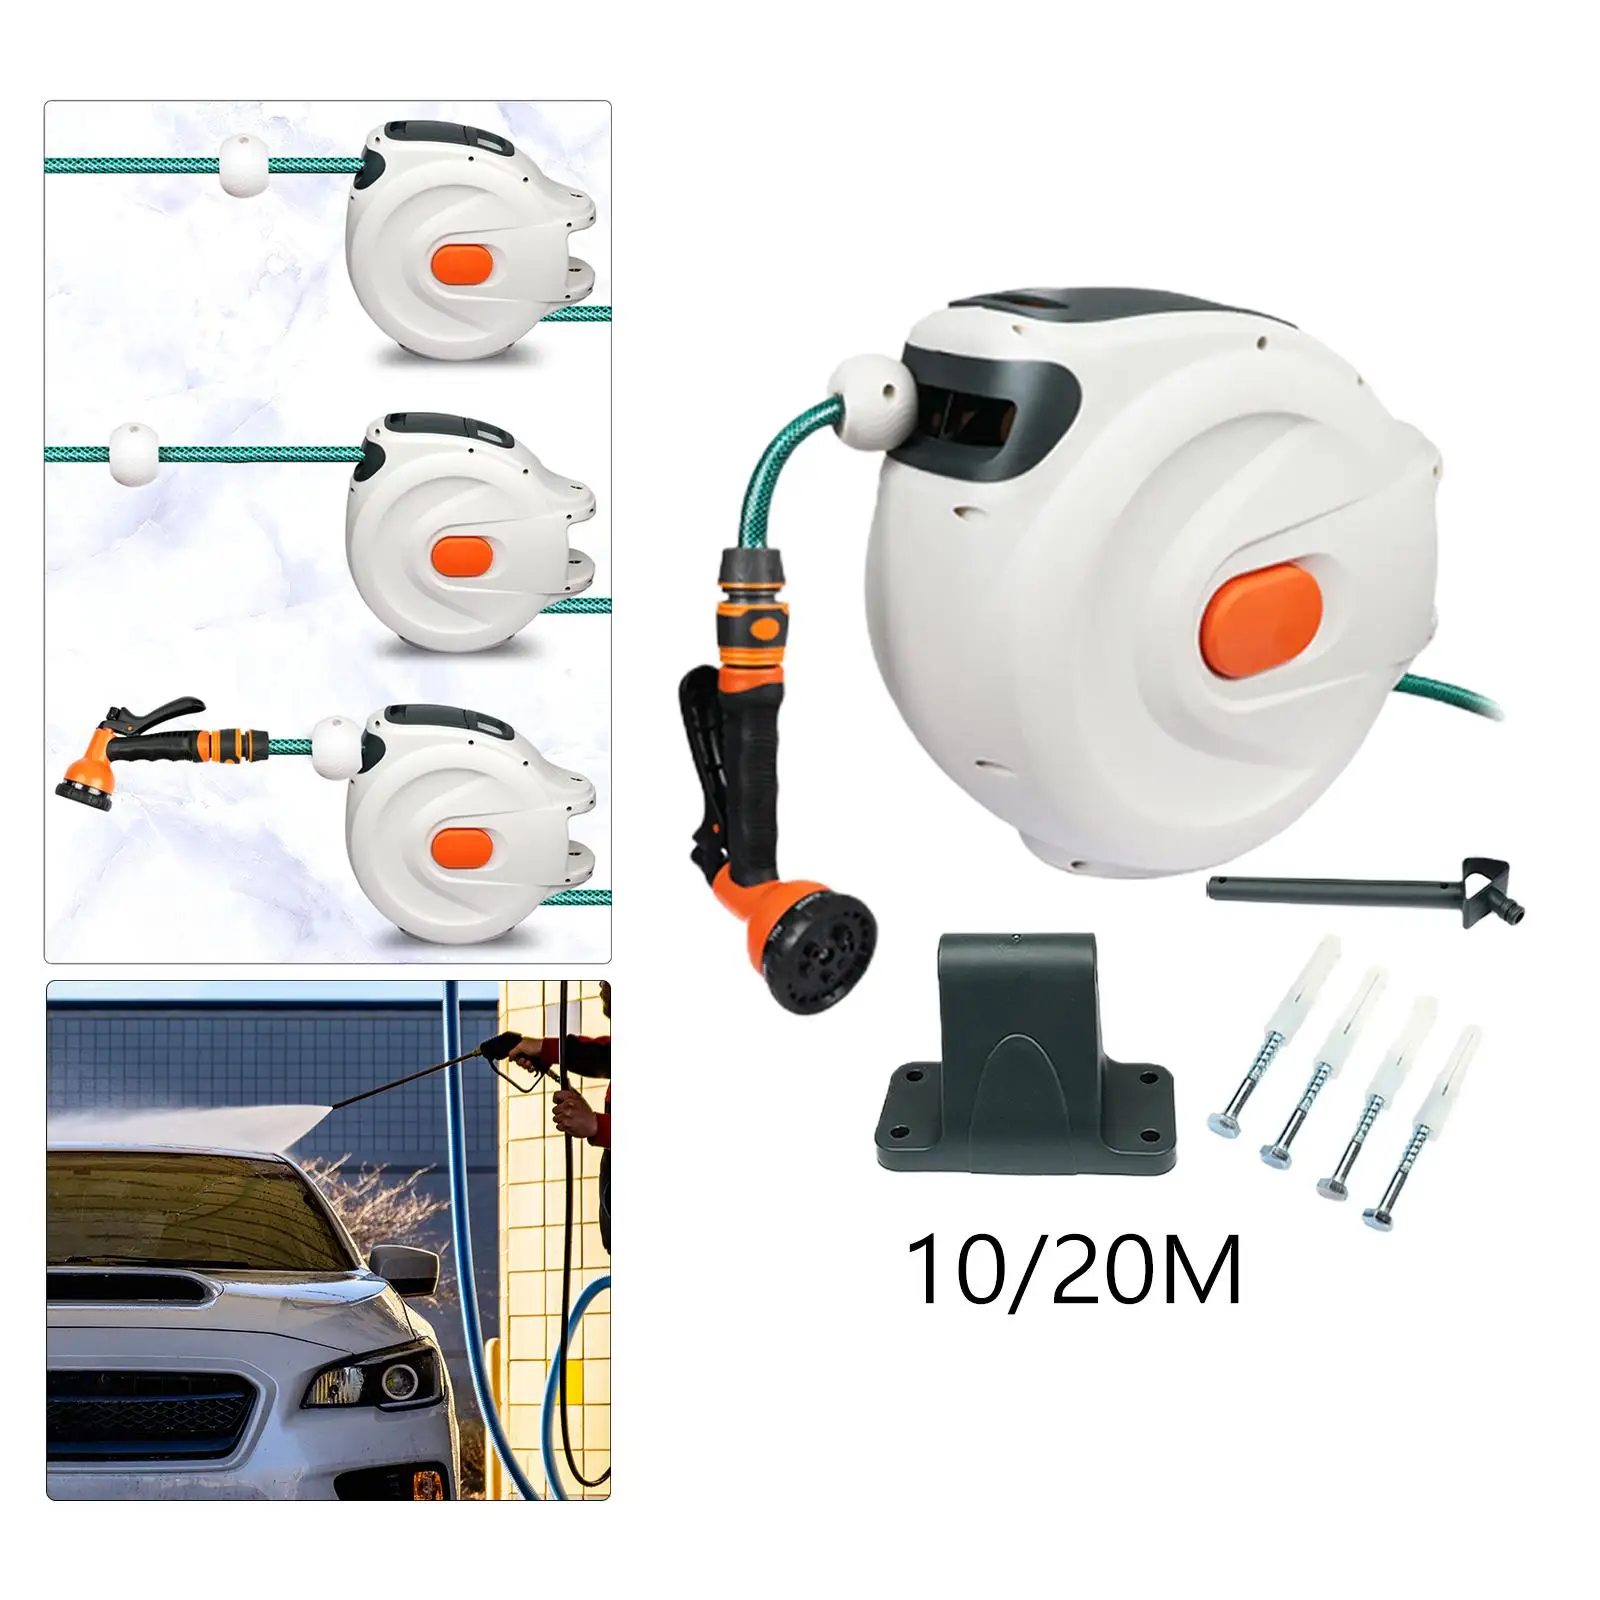 Retractable Water Hose Reel with 7 Function Sprayer Nozzle, 180 Degrees Swivel